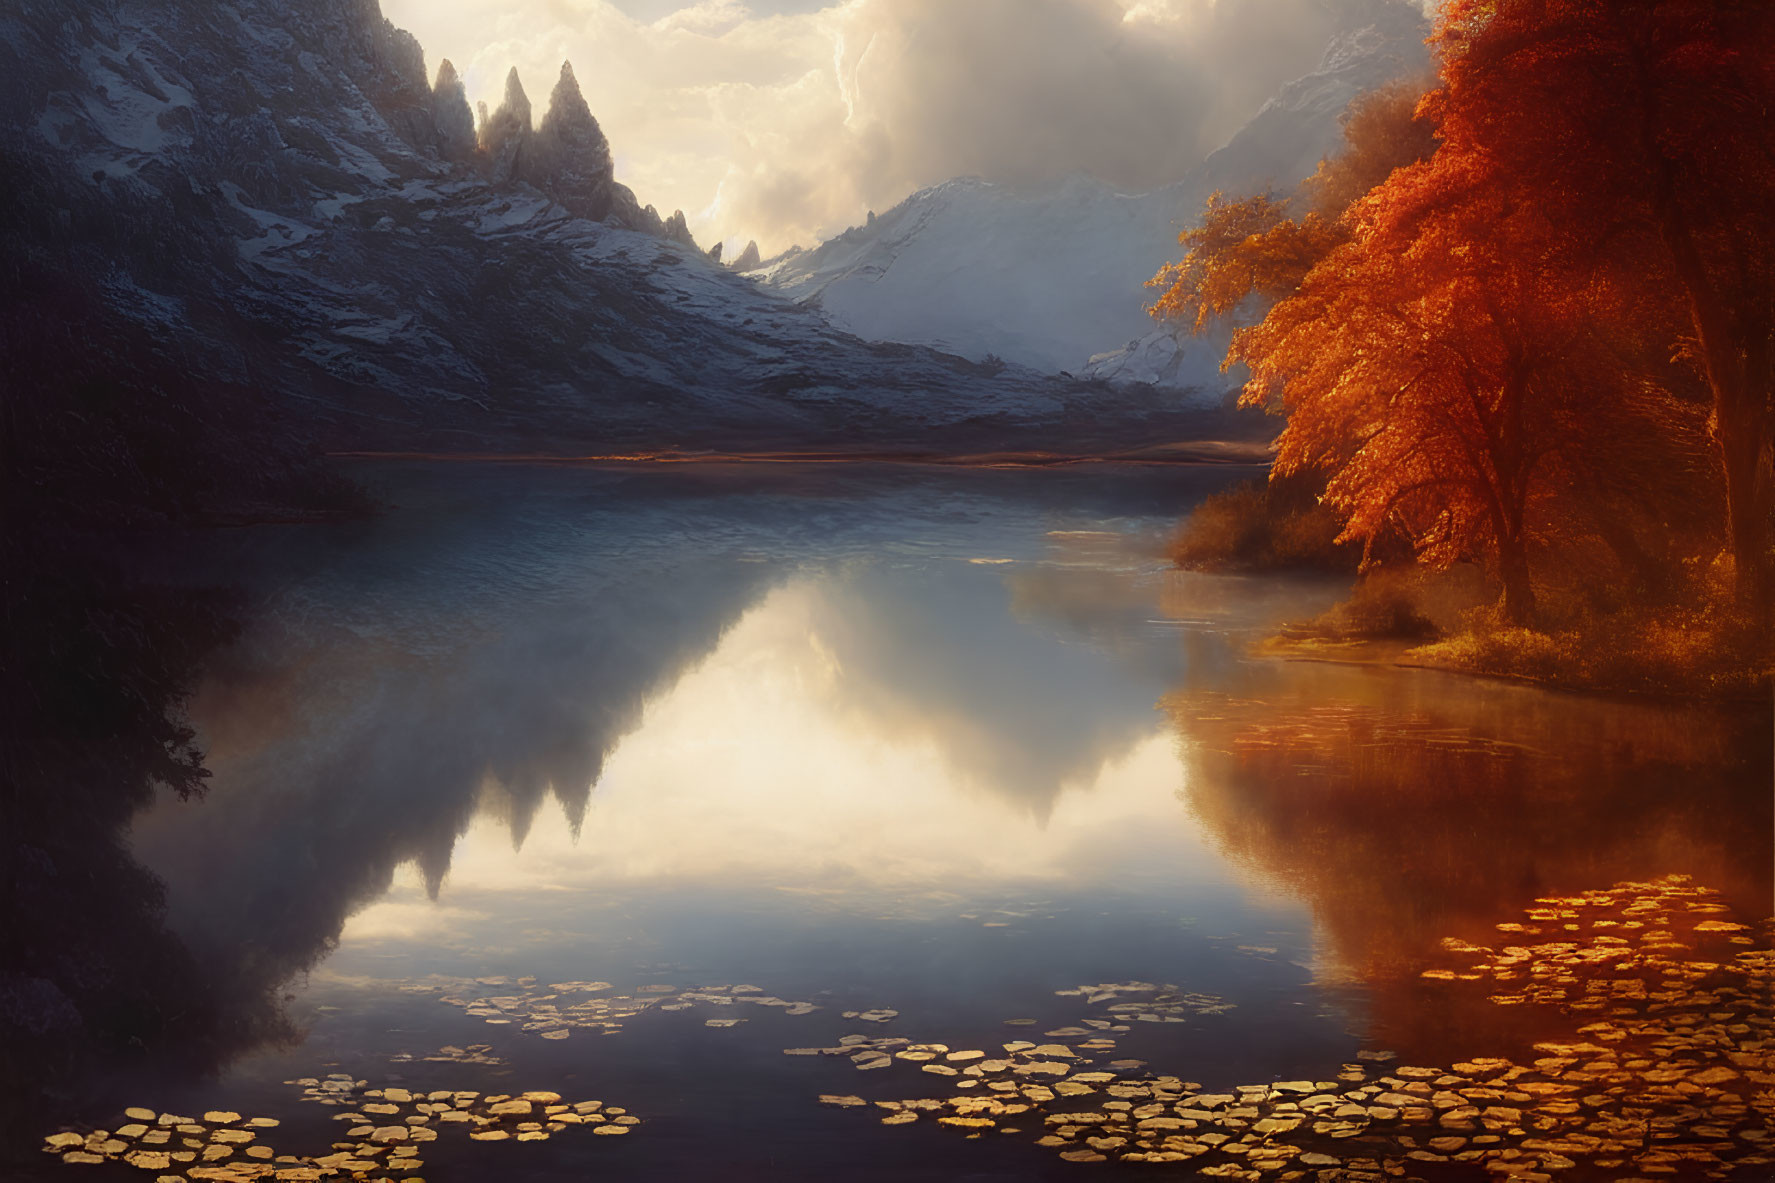 Tranquil lake with autumn trees and snowy mountains at sunset